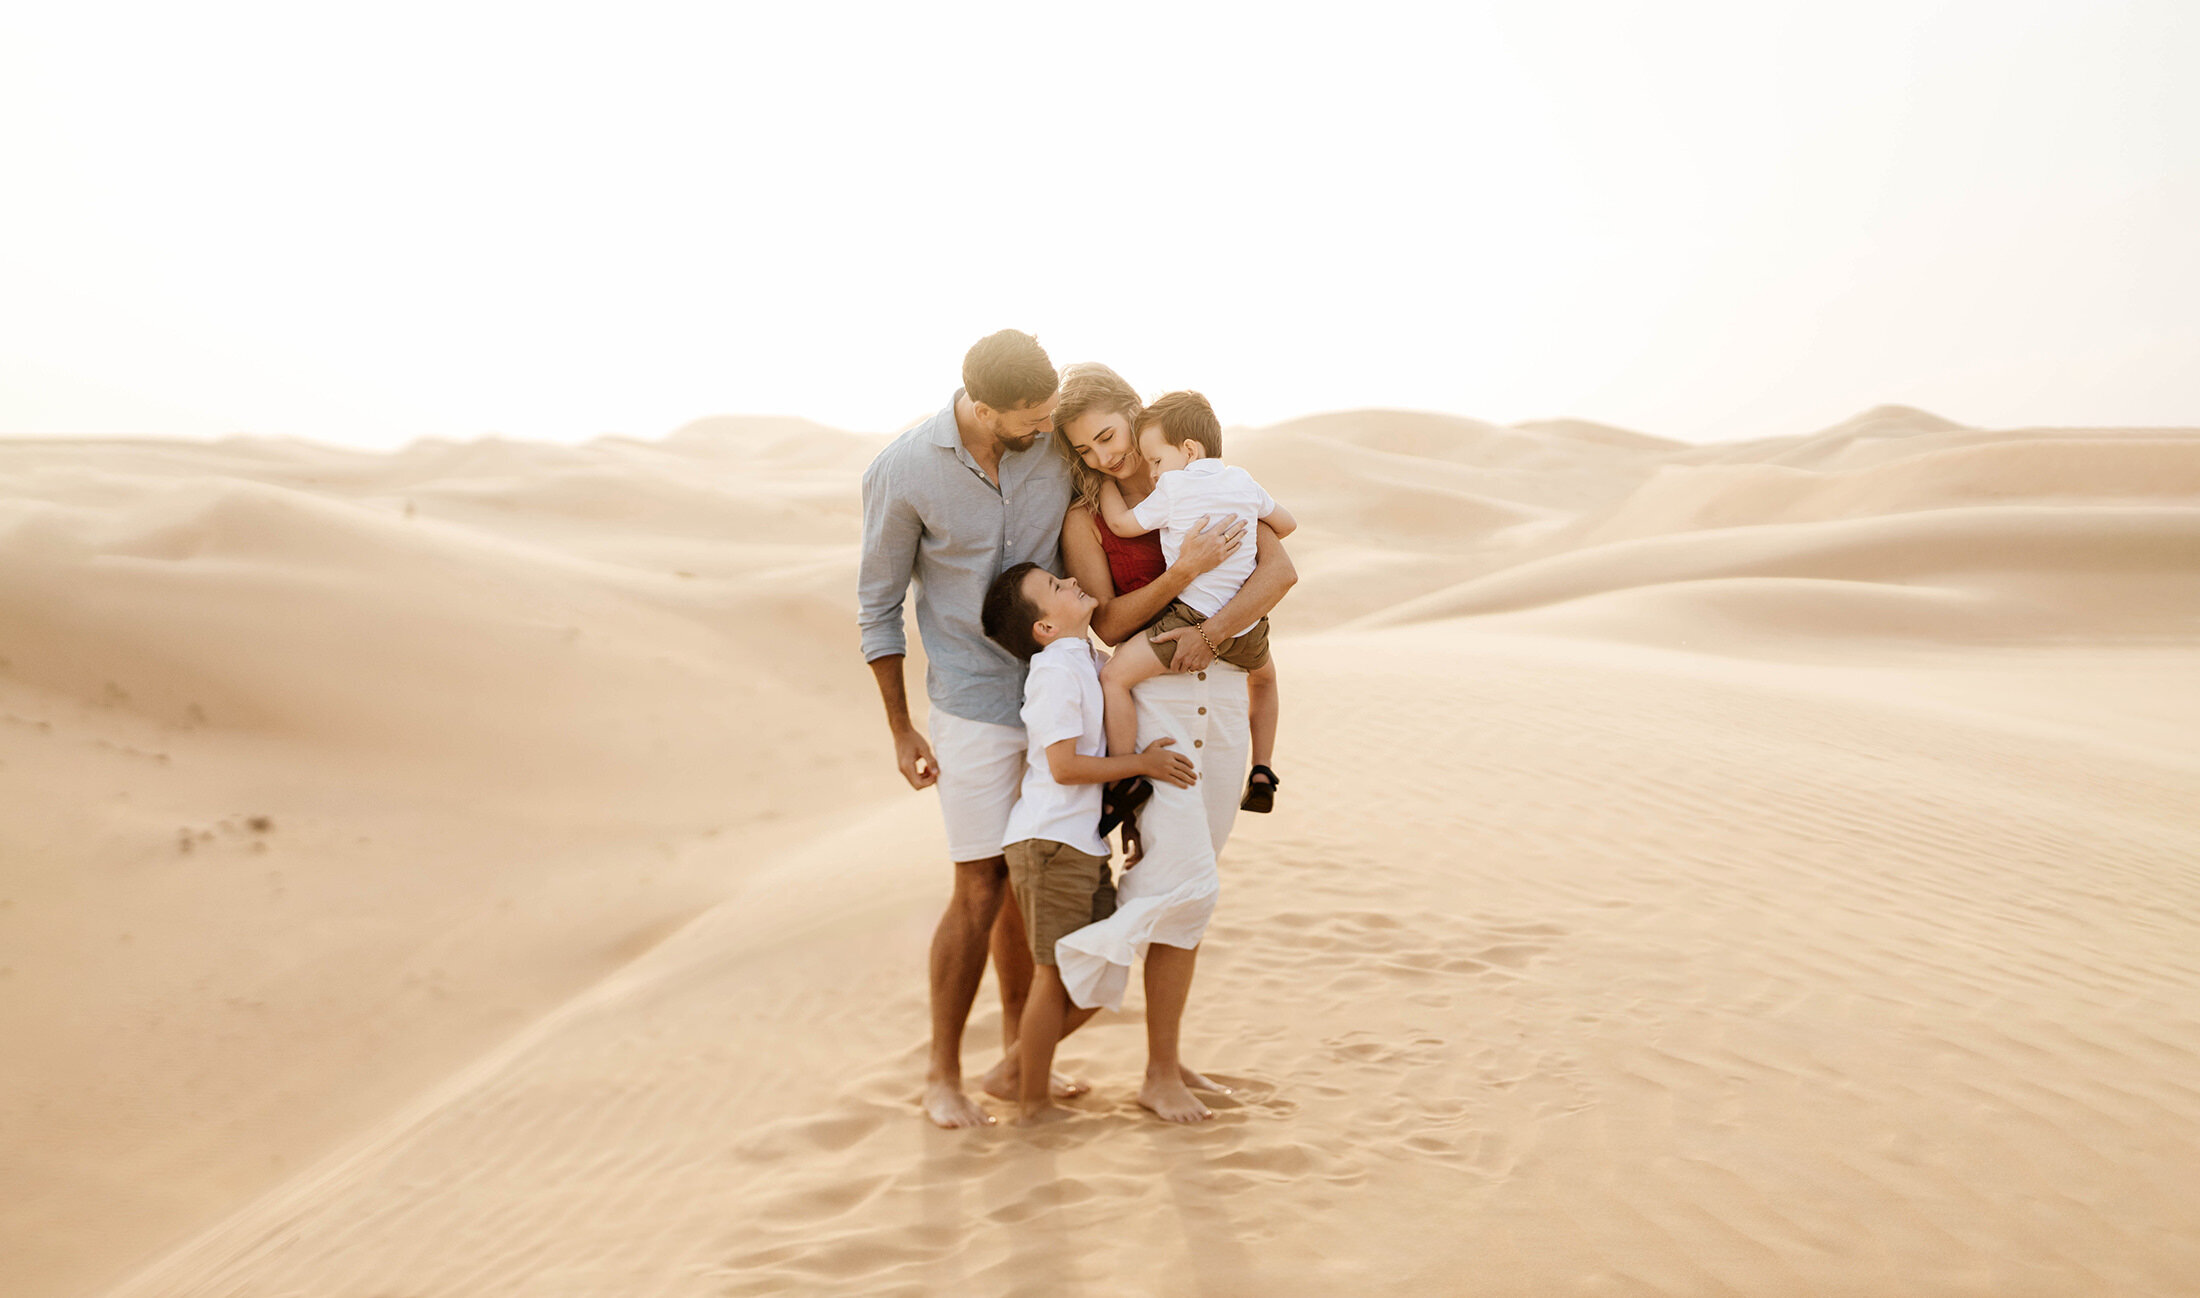 Why Should You Choose Jessica Kennedy for Your Family Photo Shoot in Abu Dhabi? – Jessica Kennedy Photography